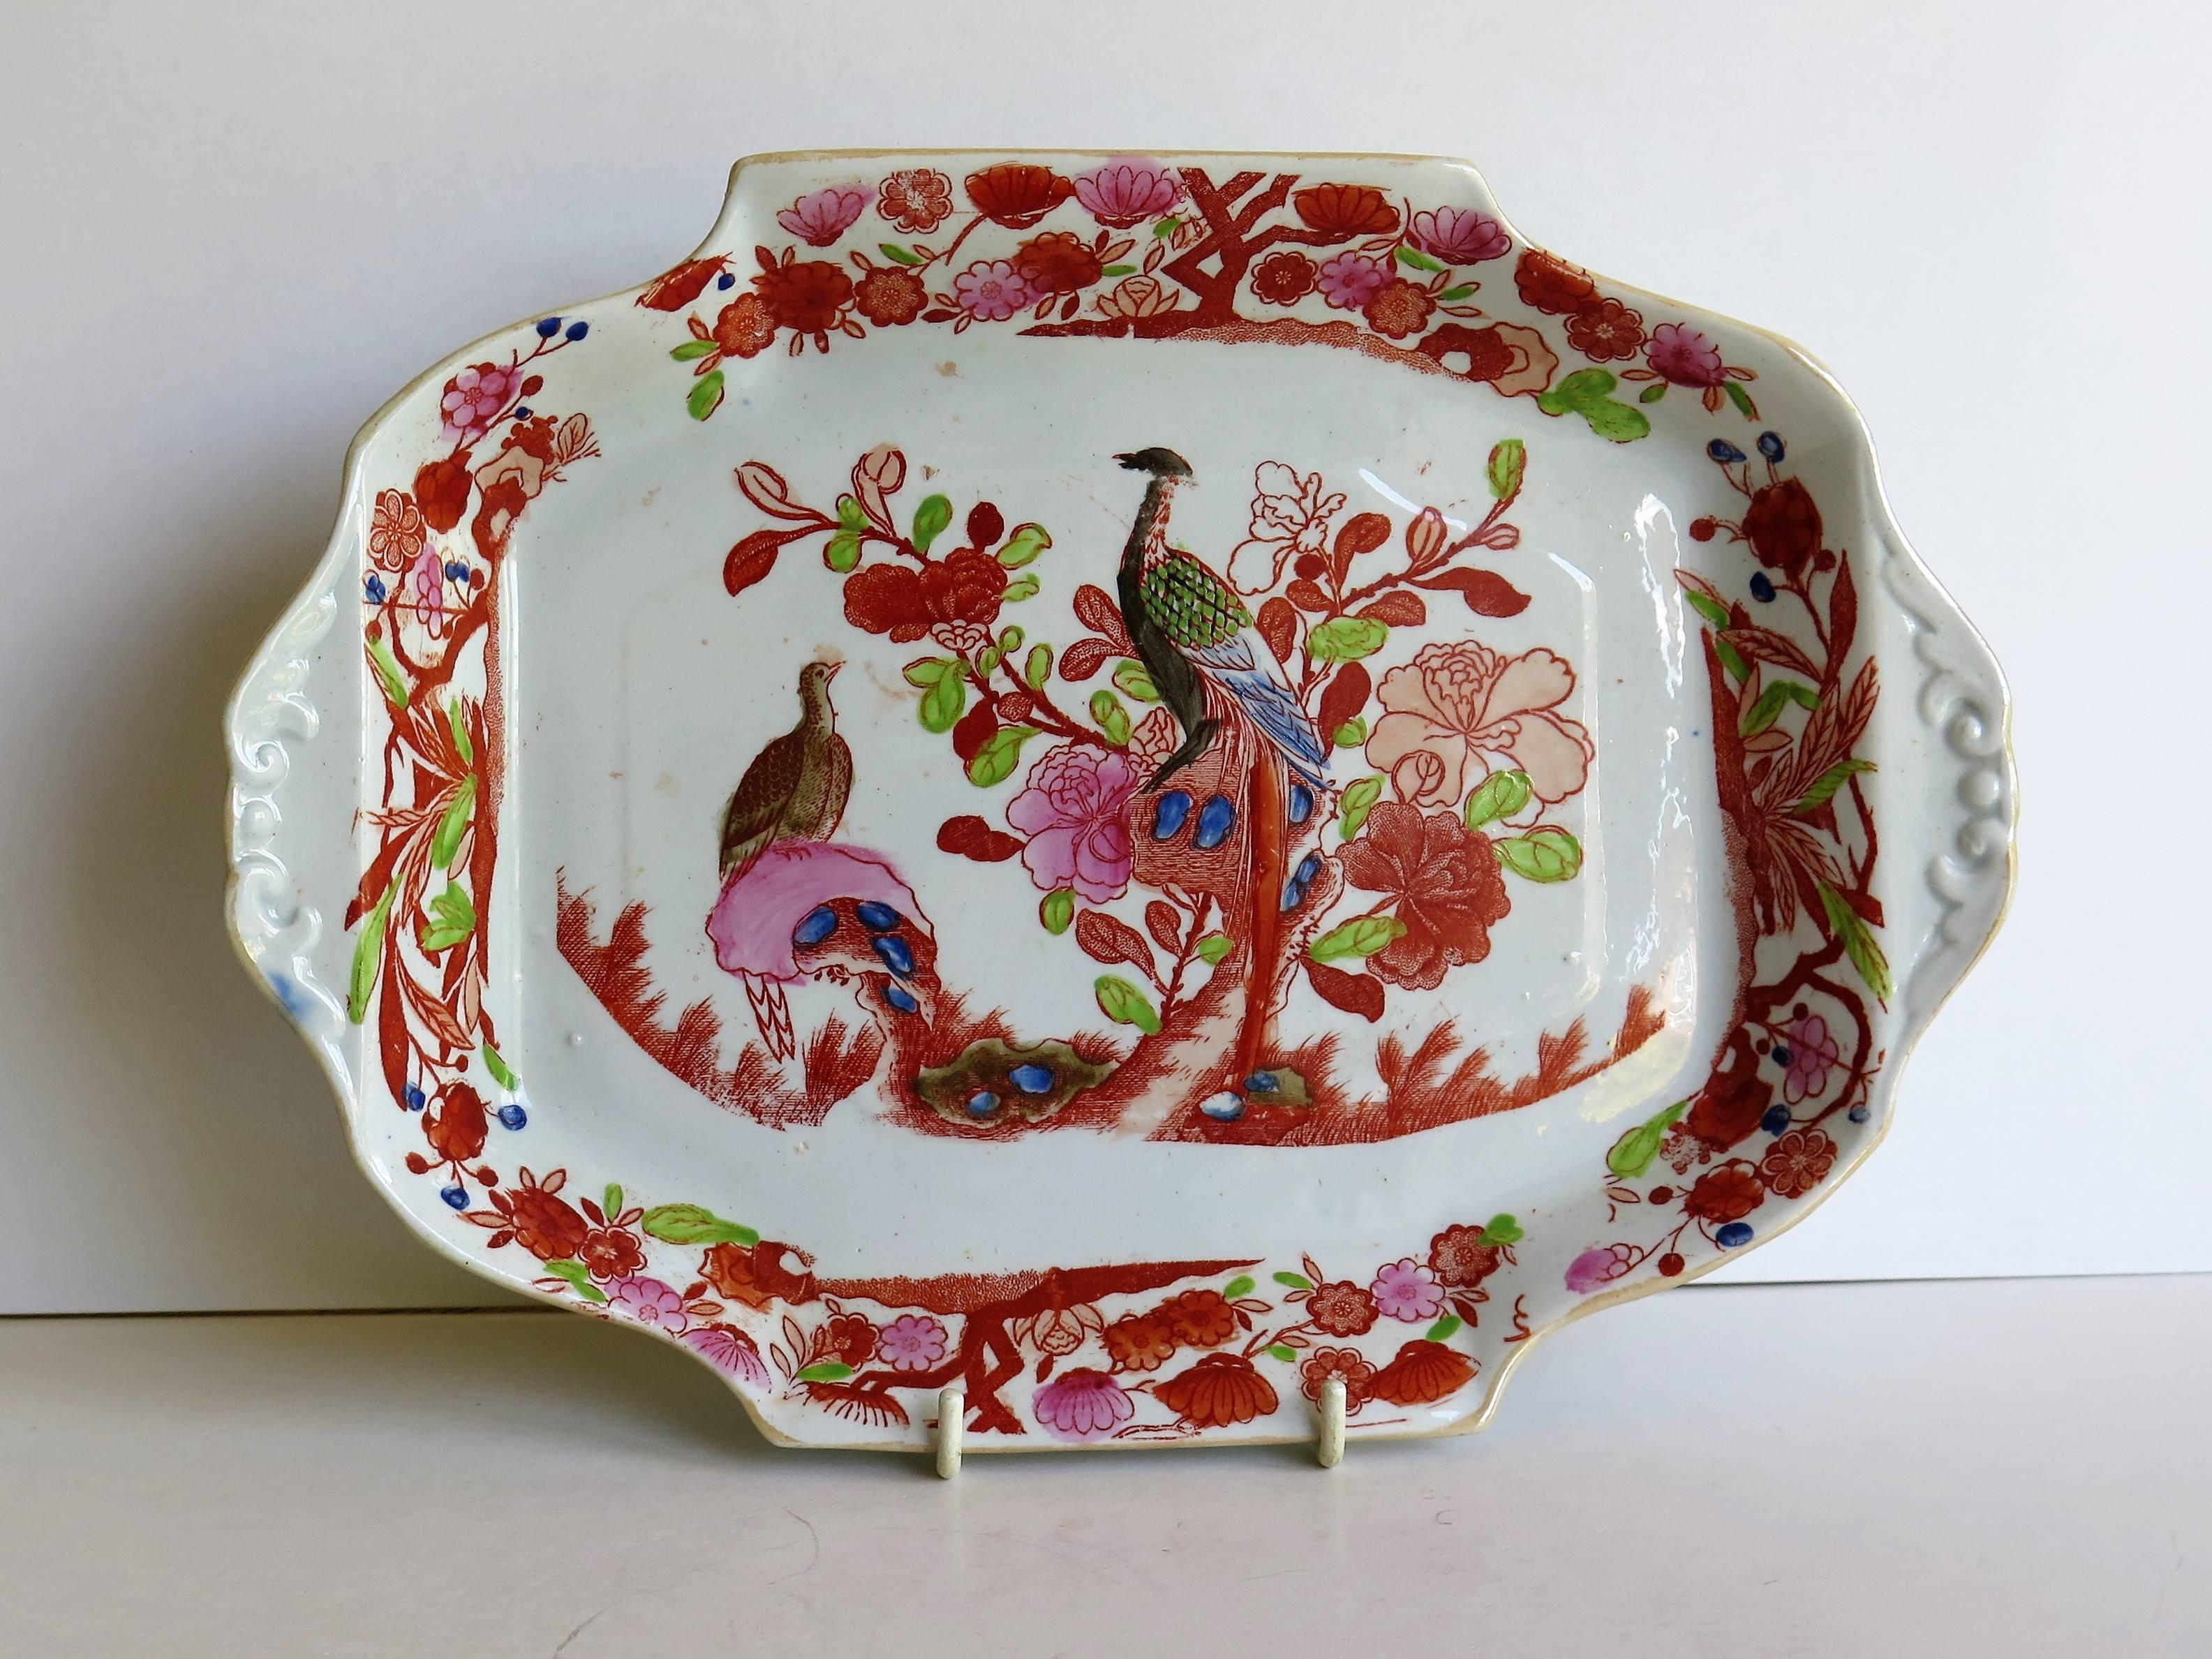 This is a very early Mason's ironstone serving dish, circa 1815.

This piece has two side handles with molded edging and would originally have been part of a desert service as illustrated on page 156 of Geoffrey Godden's book on Mason's China and